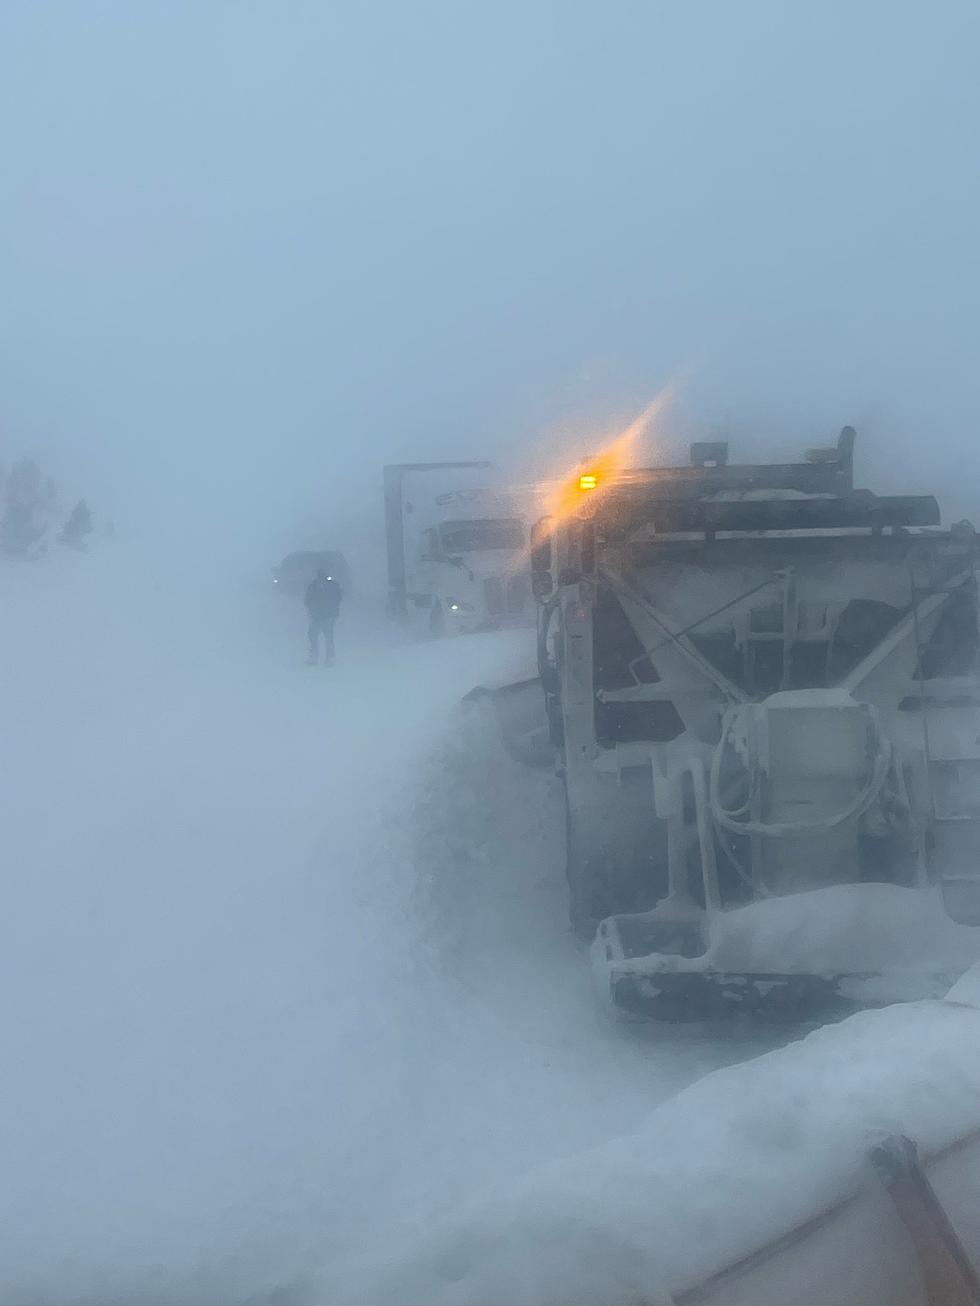 Crews Across Wyoming Work to Clear the Roads